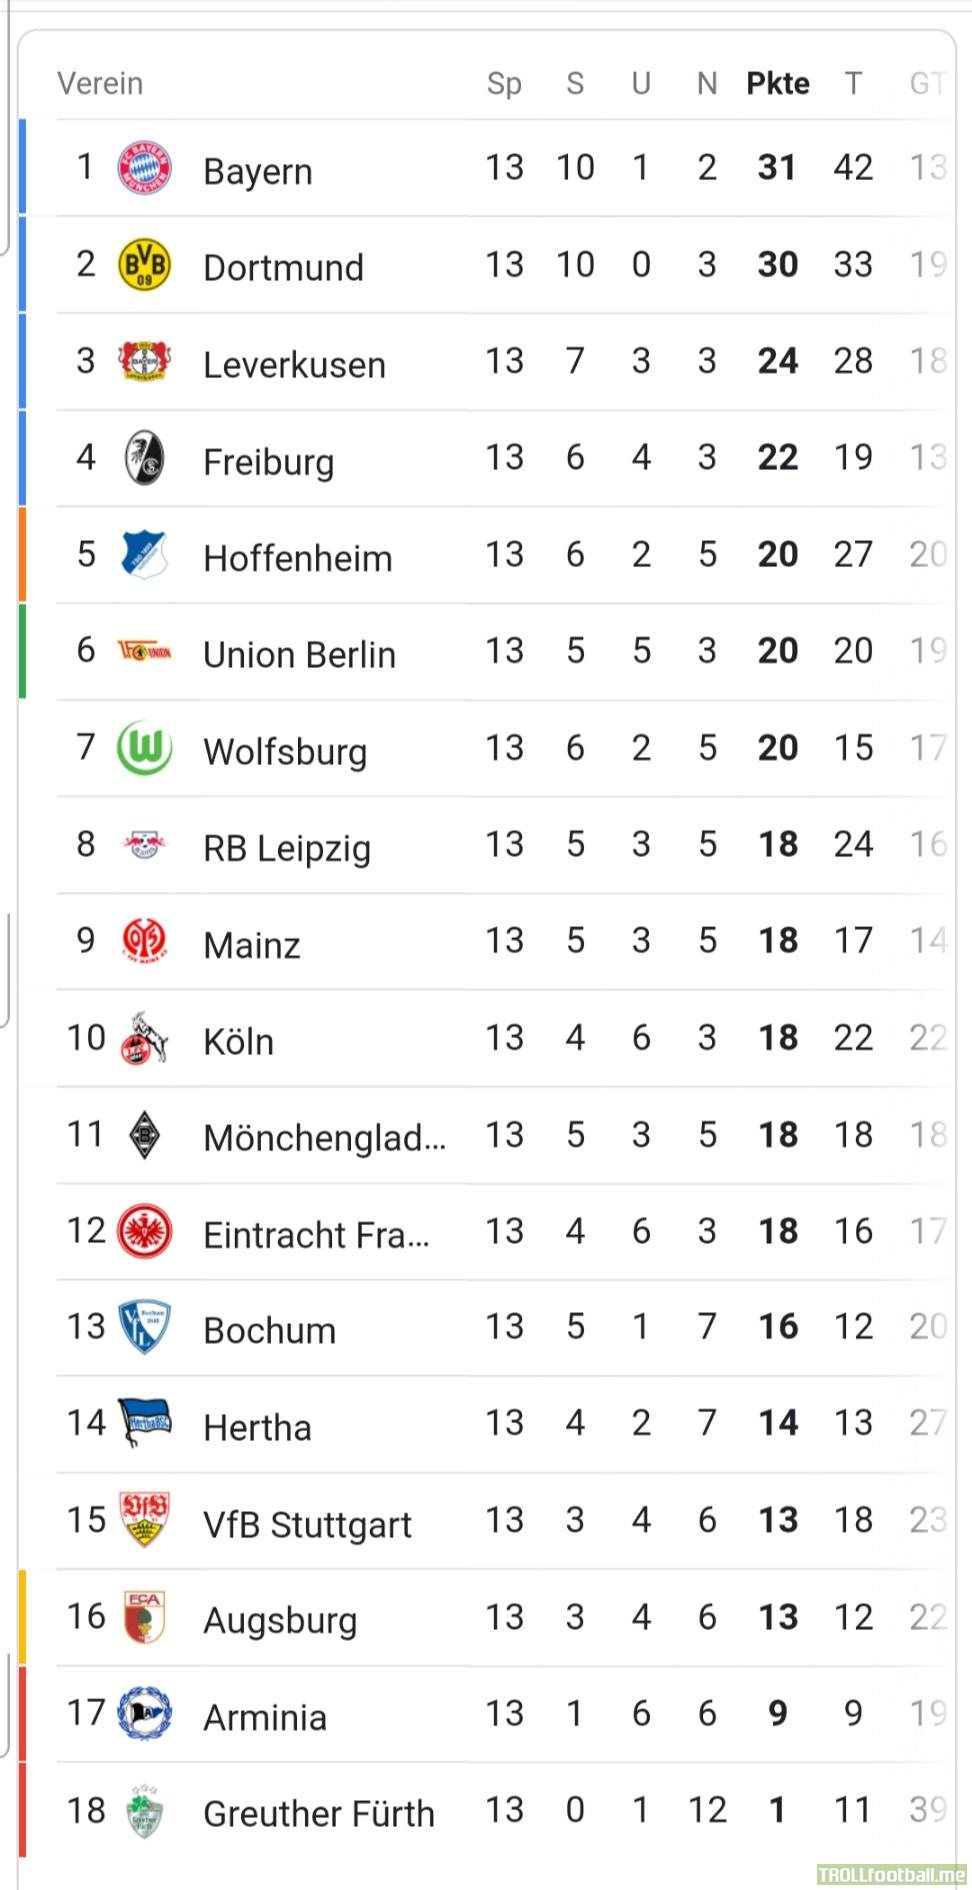 Bundesliga table after 13 matchdays. 4 points between 4th and 12th